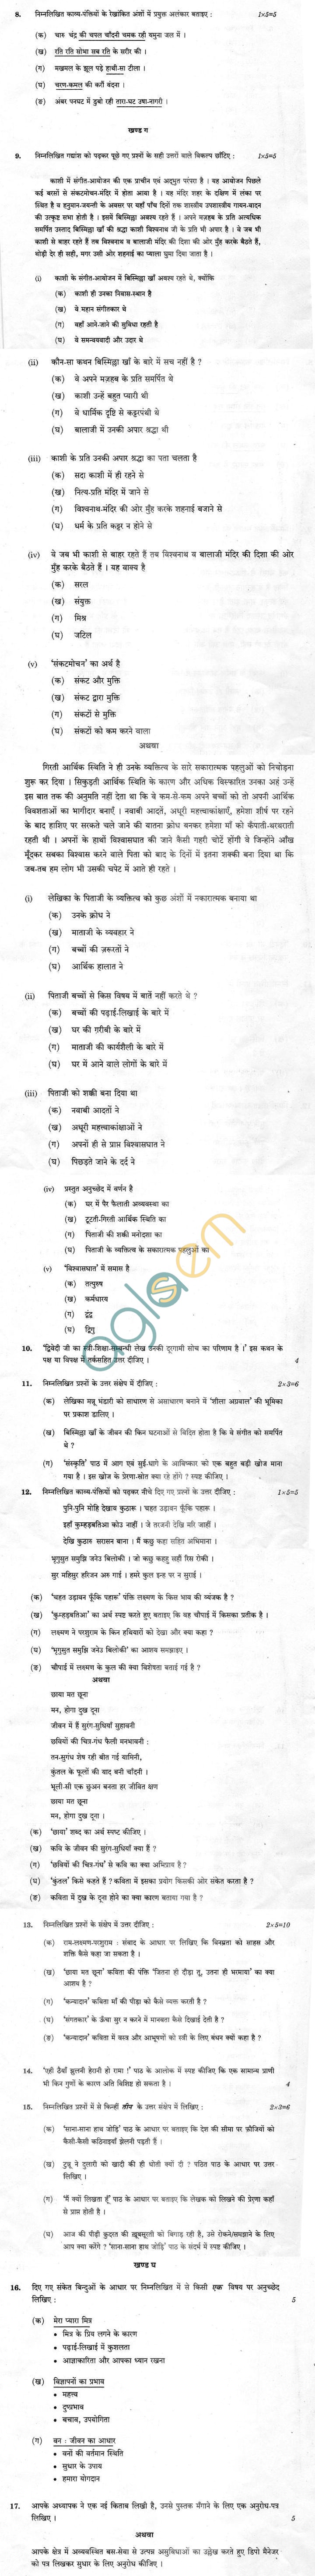 CBSE Compartment Exam 2013 Class X Question Paper - Hindi (Course A)